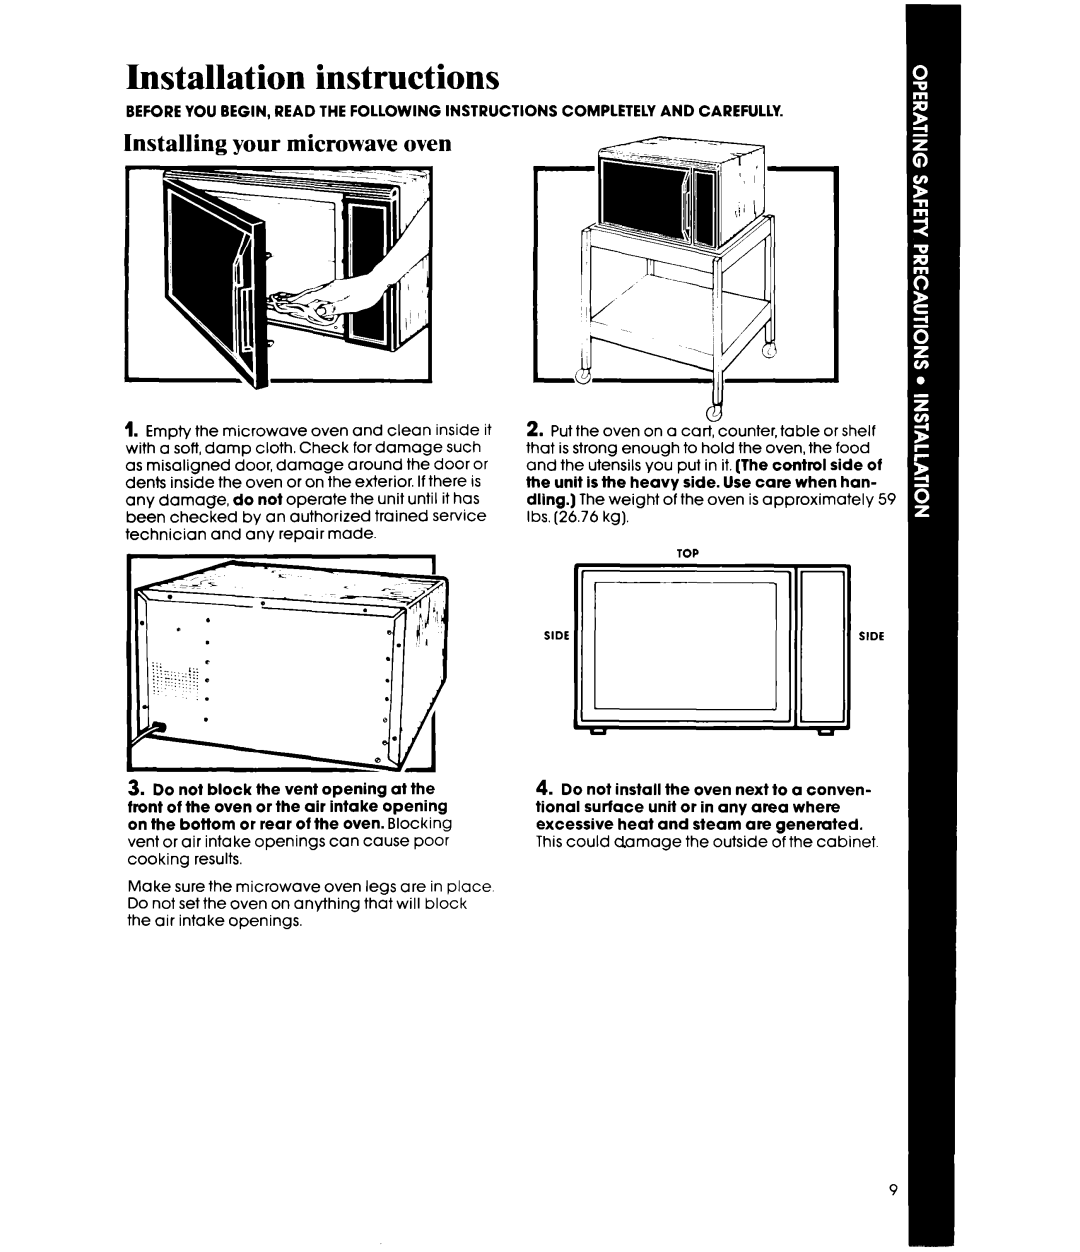 Whirlpool MW8200XR manual Installation instructions, Installing your microwave oven 